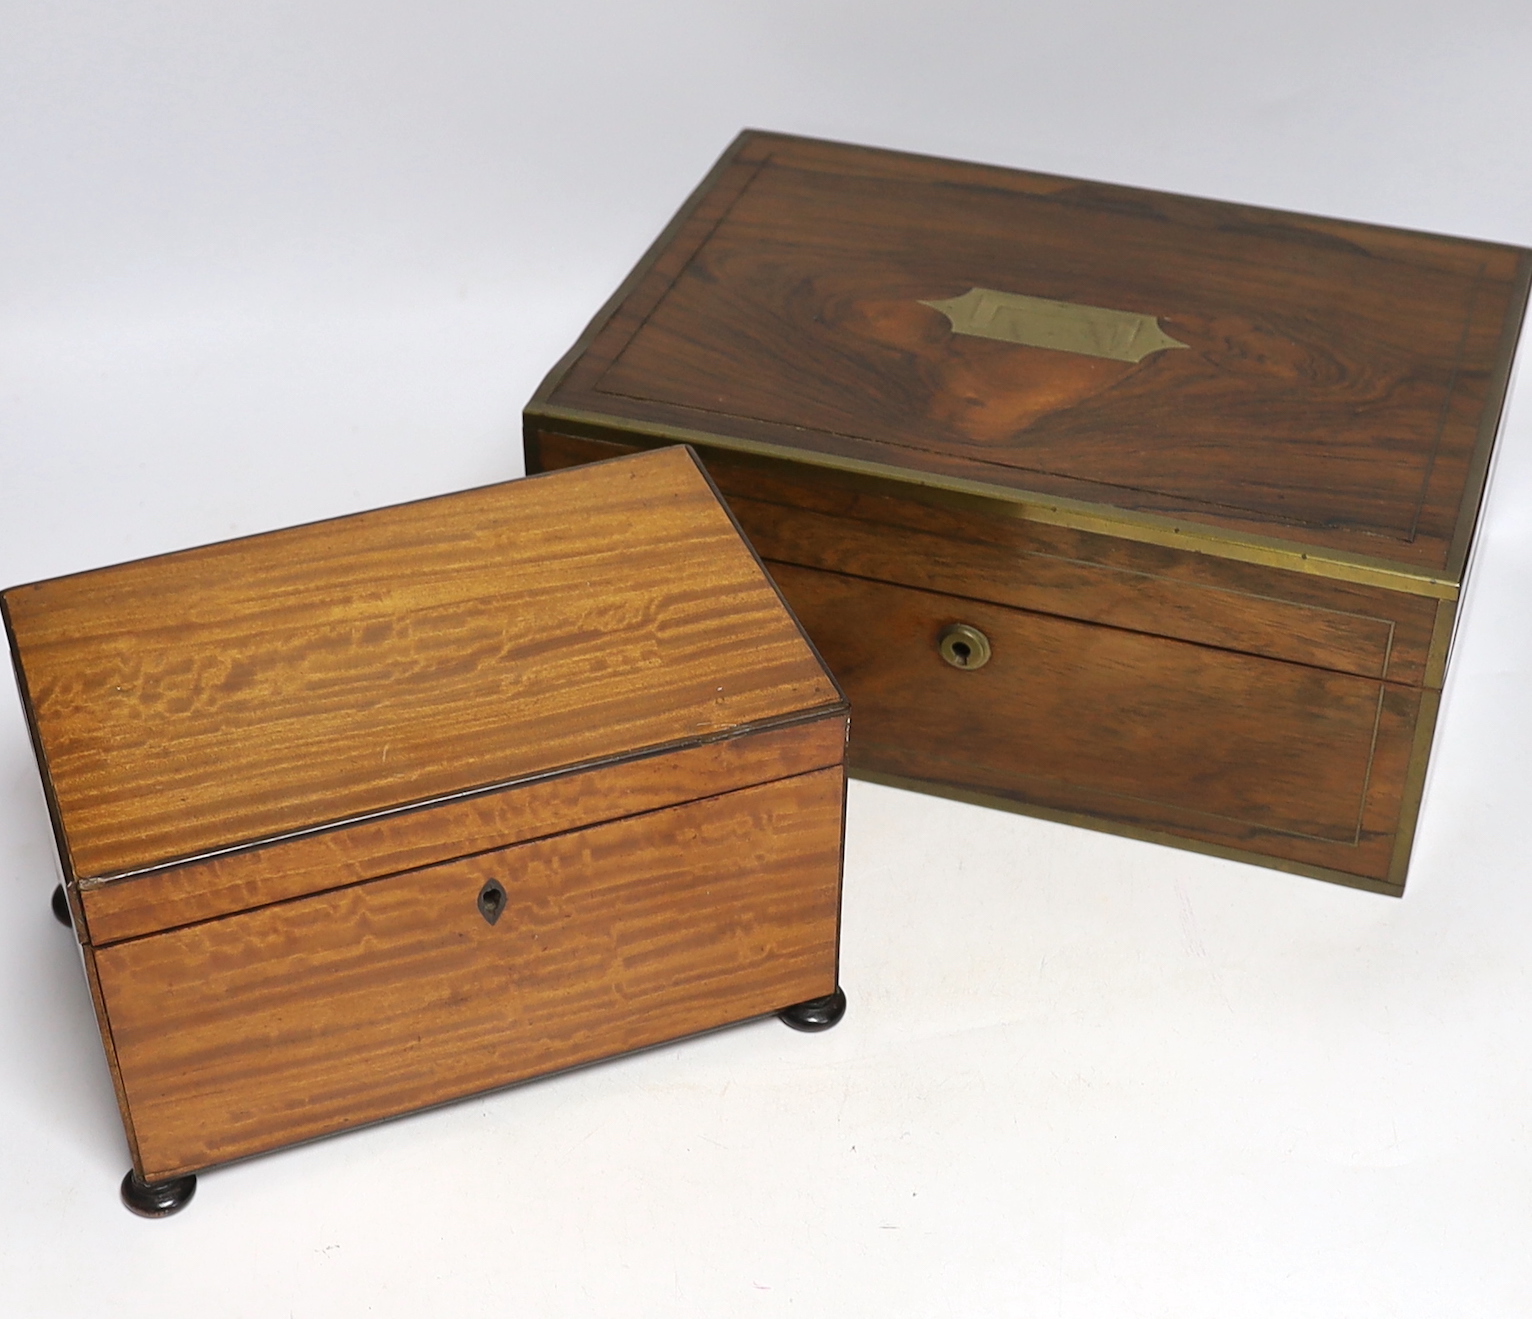 A Victorian brass bound rosewood writing box, 30.5 x 22 x 13cm, a George IV satinwood tea caddy and three Japonaise lacquered wall brackets